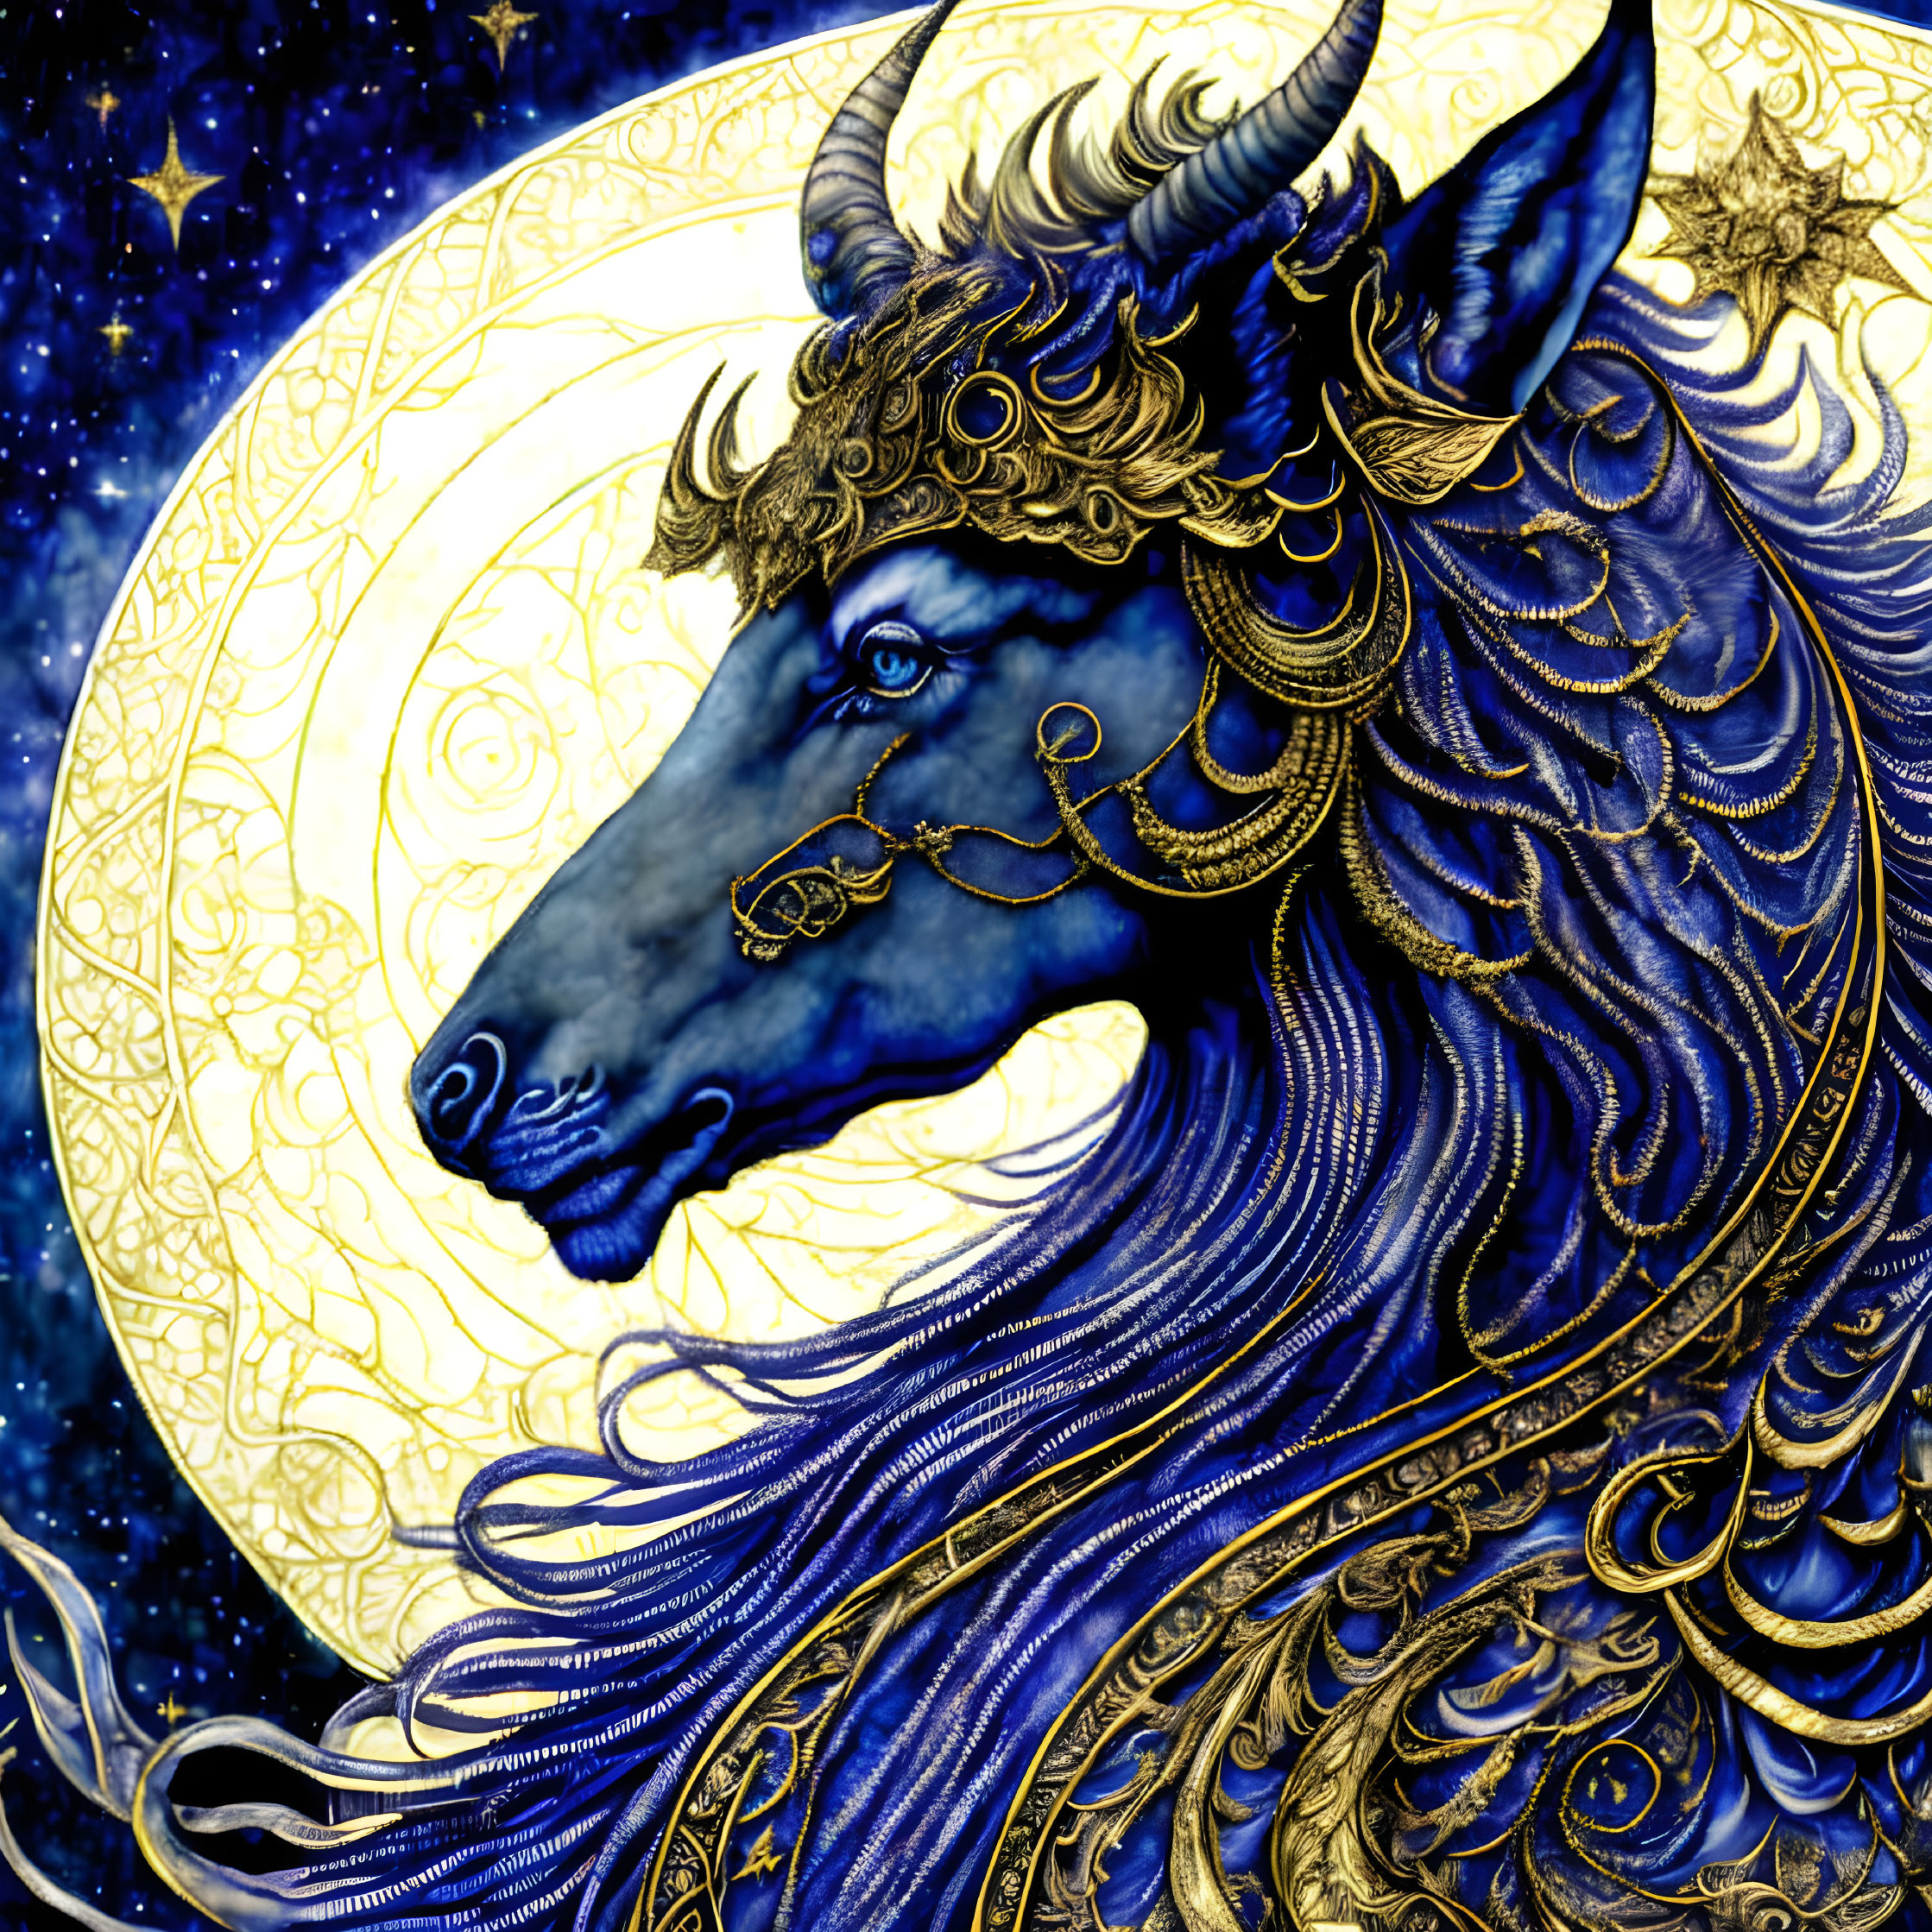 Detailed Blue Bovine Creature Illustration with Golden Adornments on Starry Night Sky